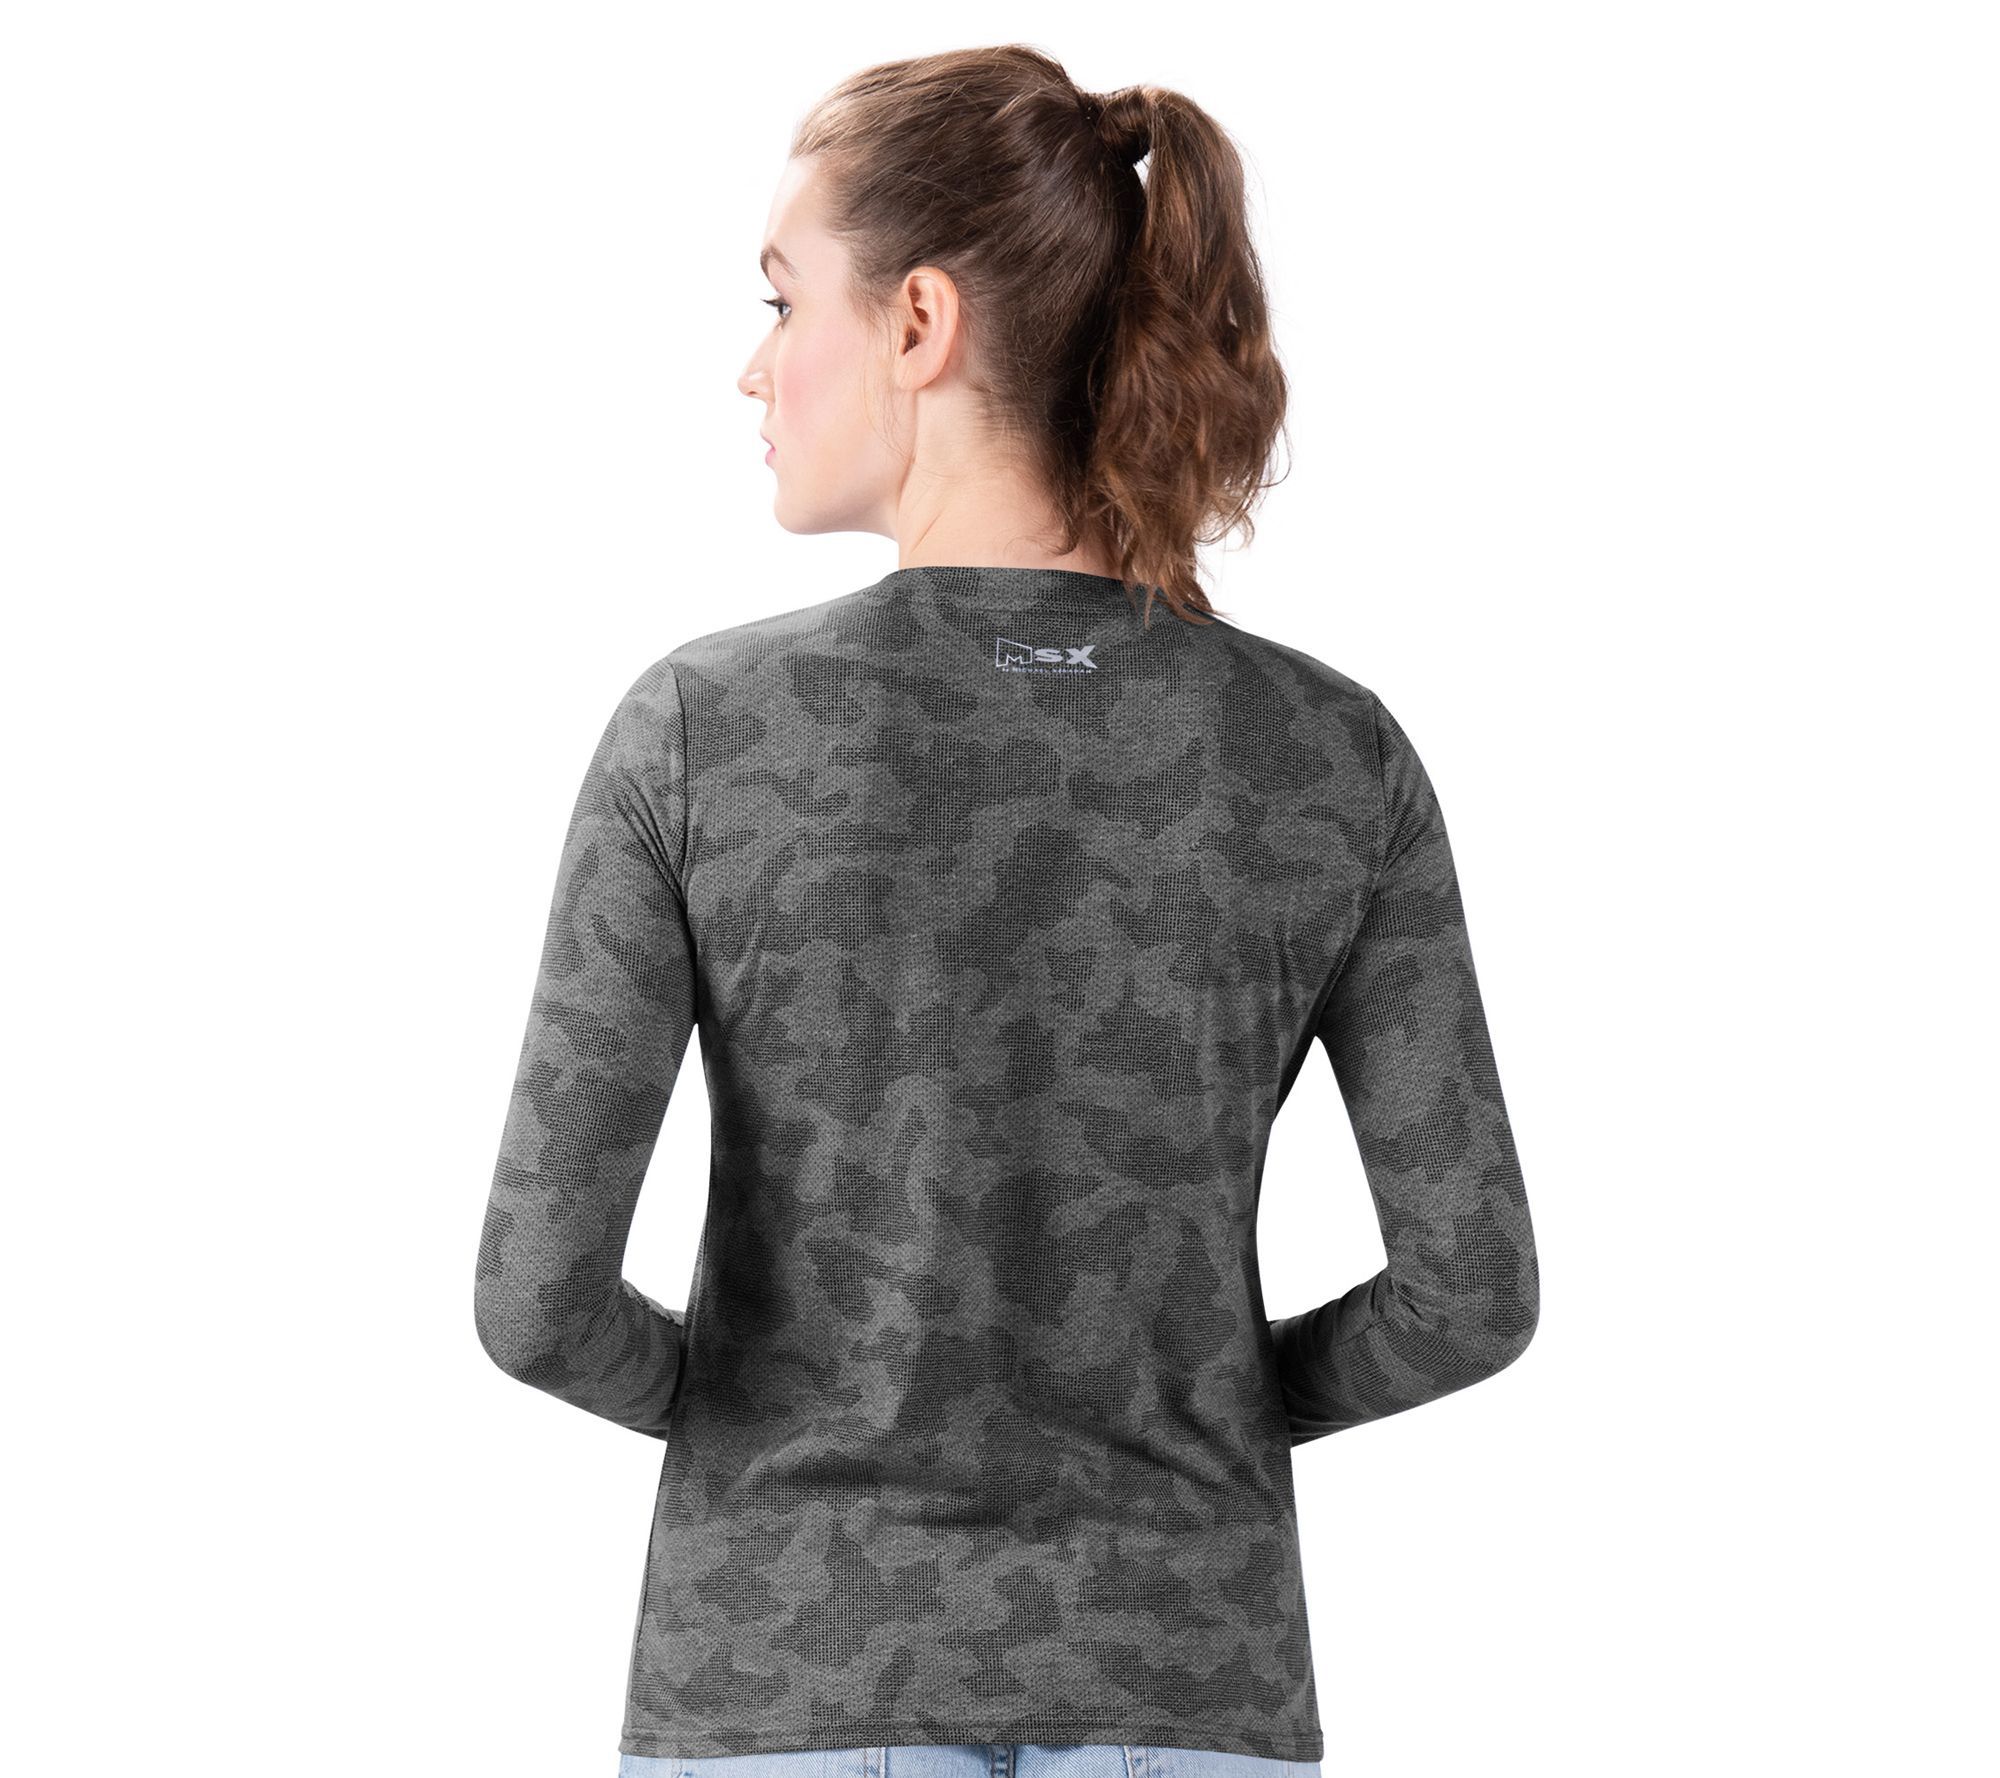 Msx By Michael Strahan For Nfl Womens Camo Long Sleeve 